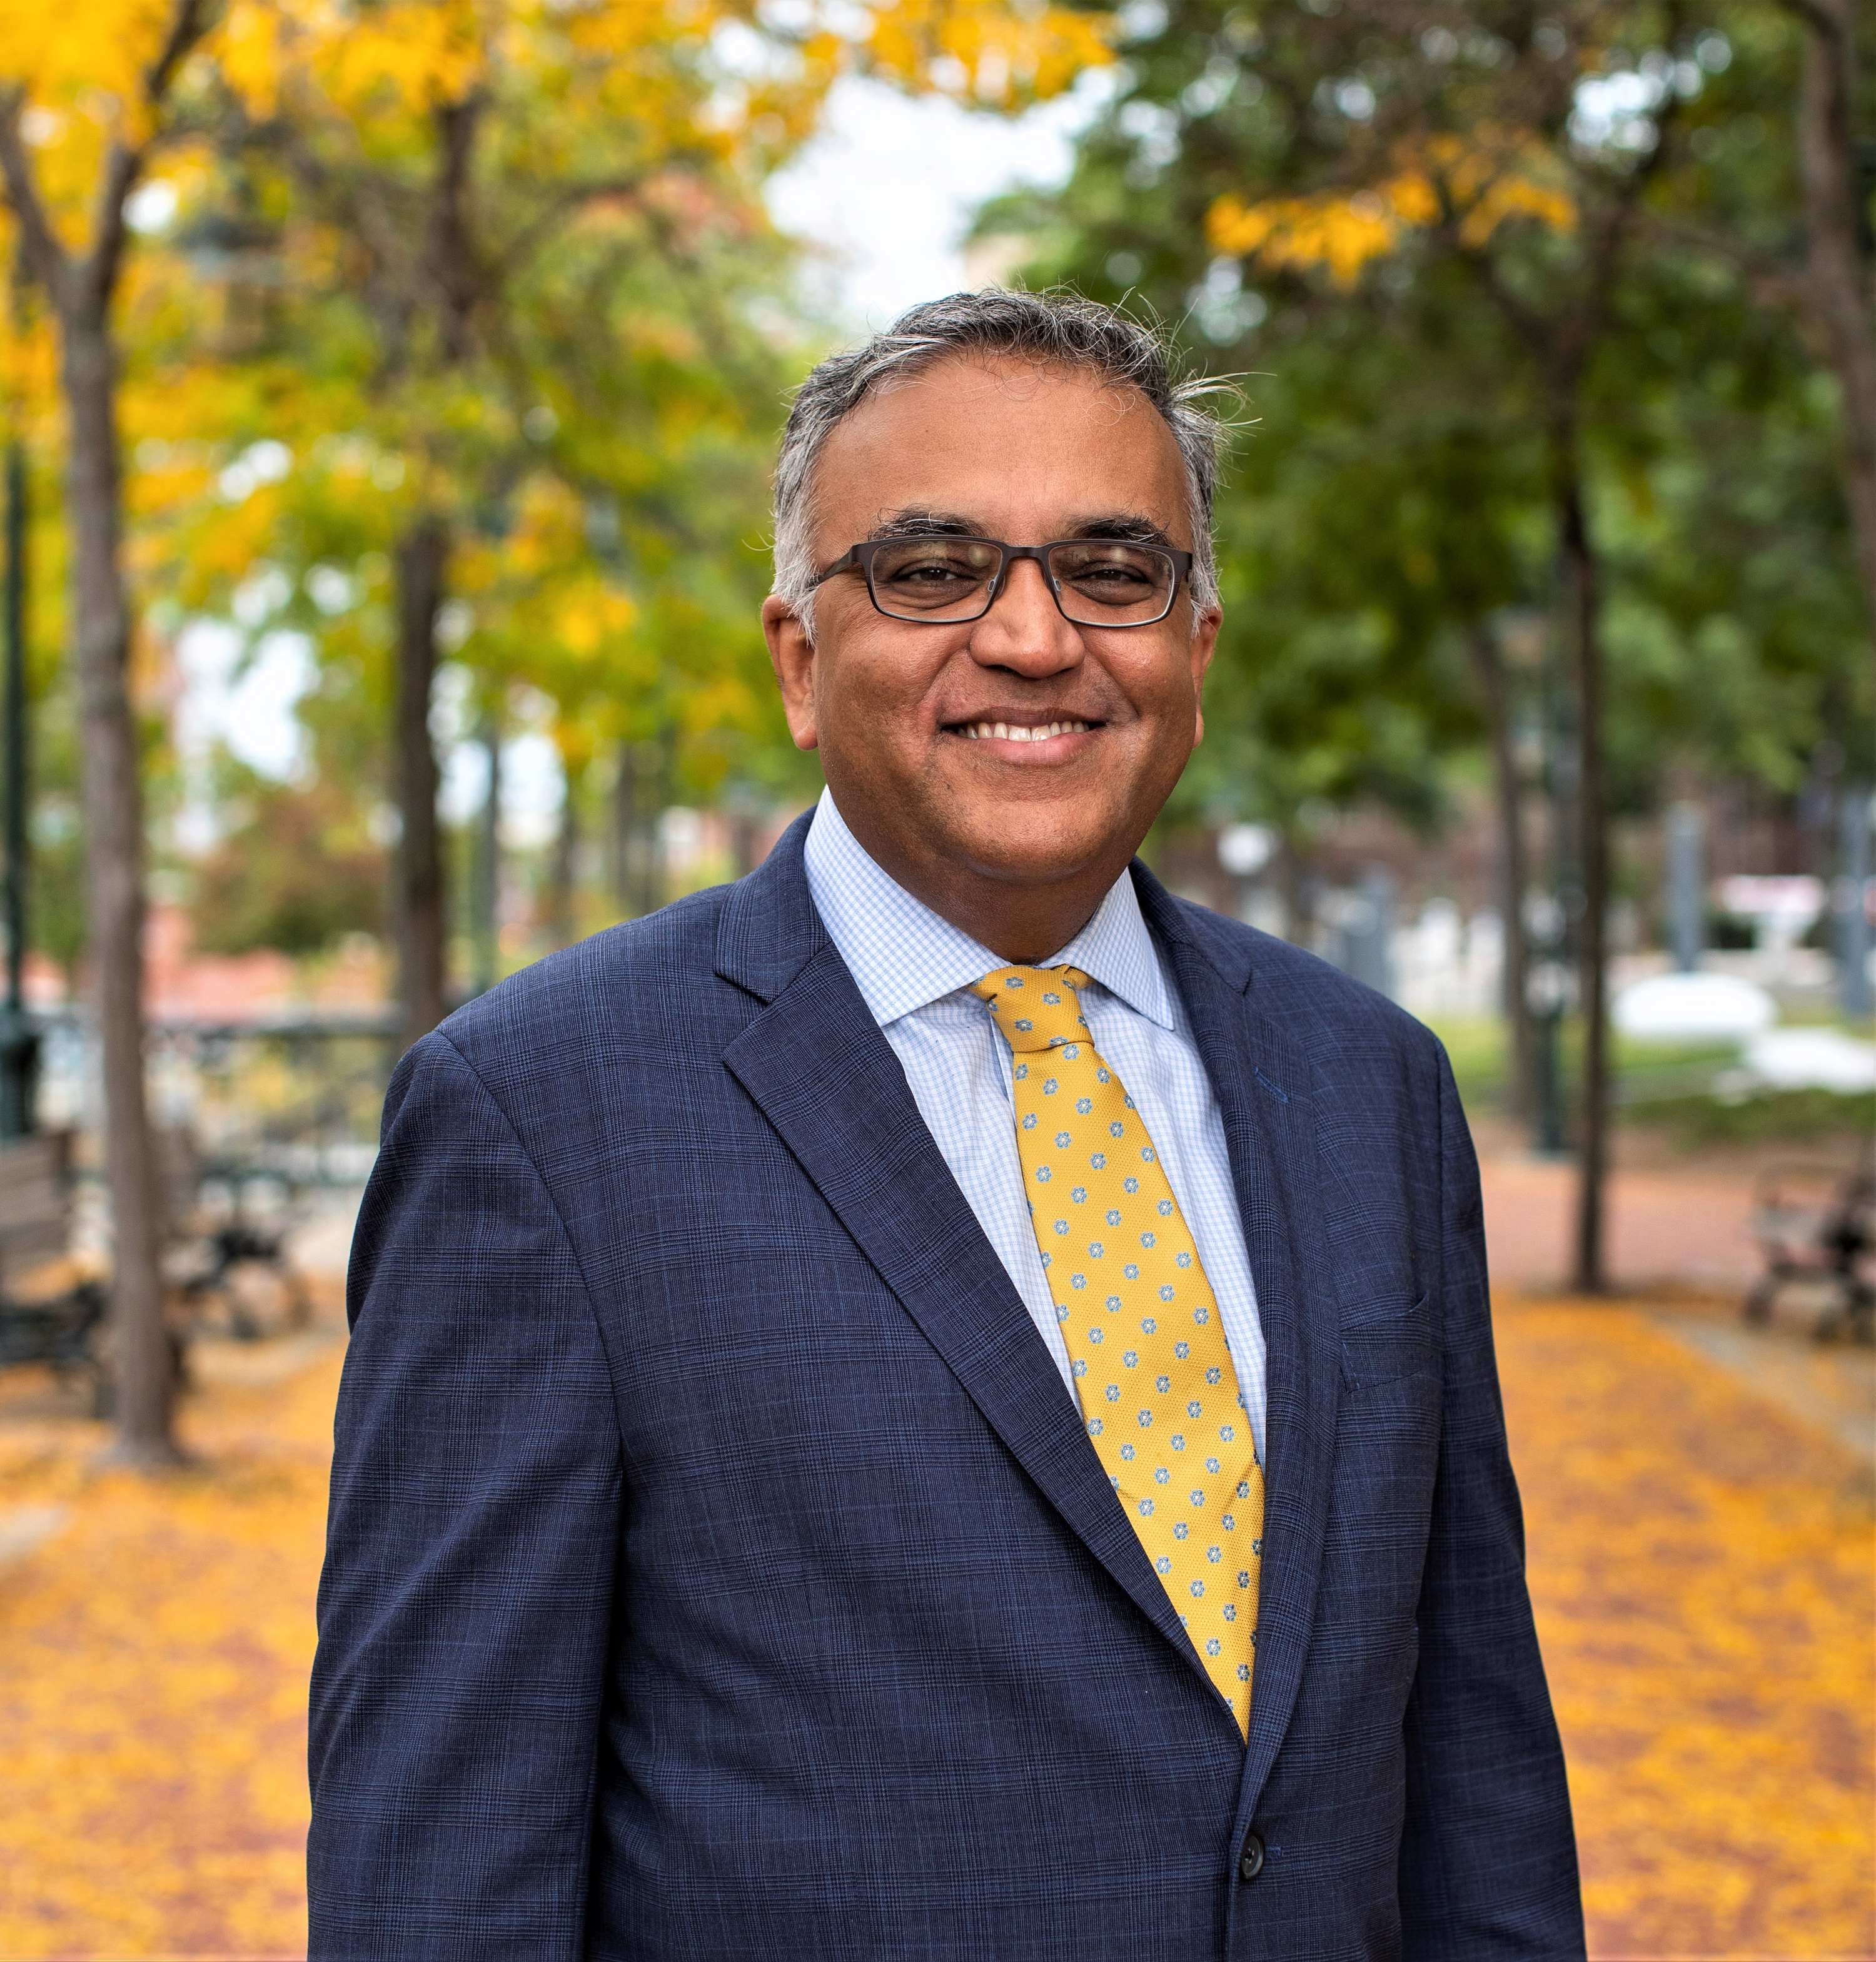 Welcome to Episode 19 of “COVID: What comes next,” an exclusive weekly Providence Journal/USA TODAY NETWORK podcast featuring Dr. Ashish Jha, dean of the Brown University School of Public Health and an internationally respected expert on pandemic response and preparedness.